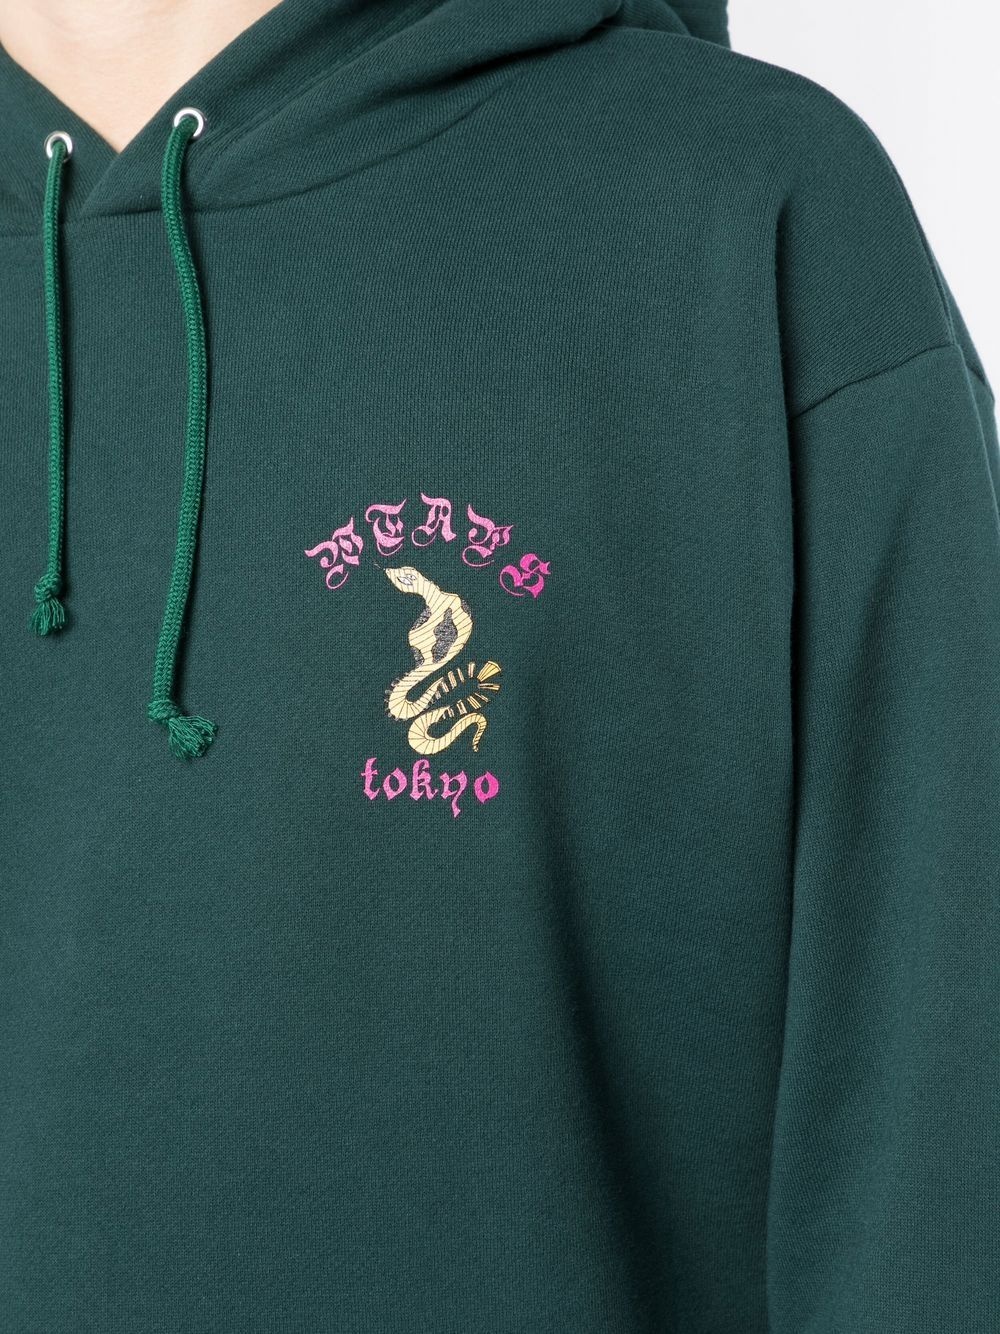 embroidered-logo pullover hoodie - 5